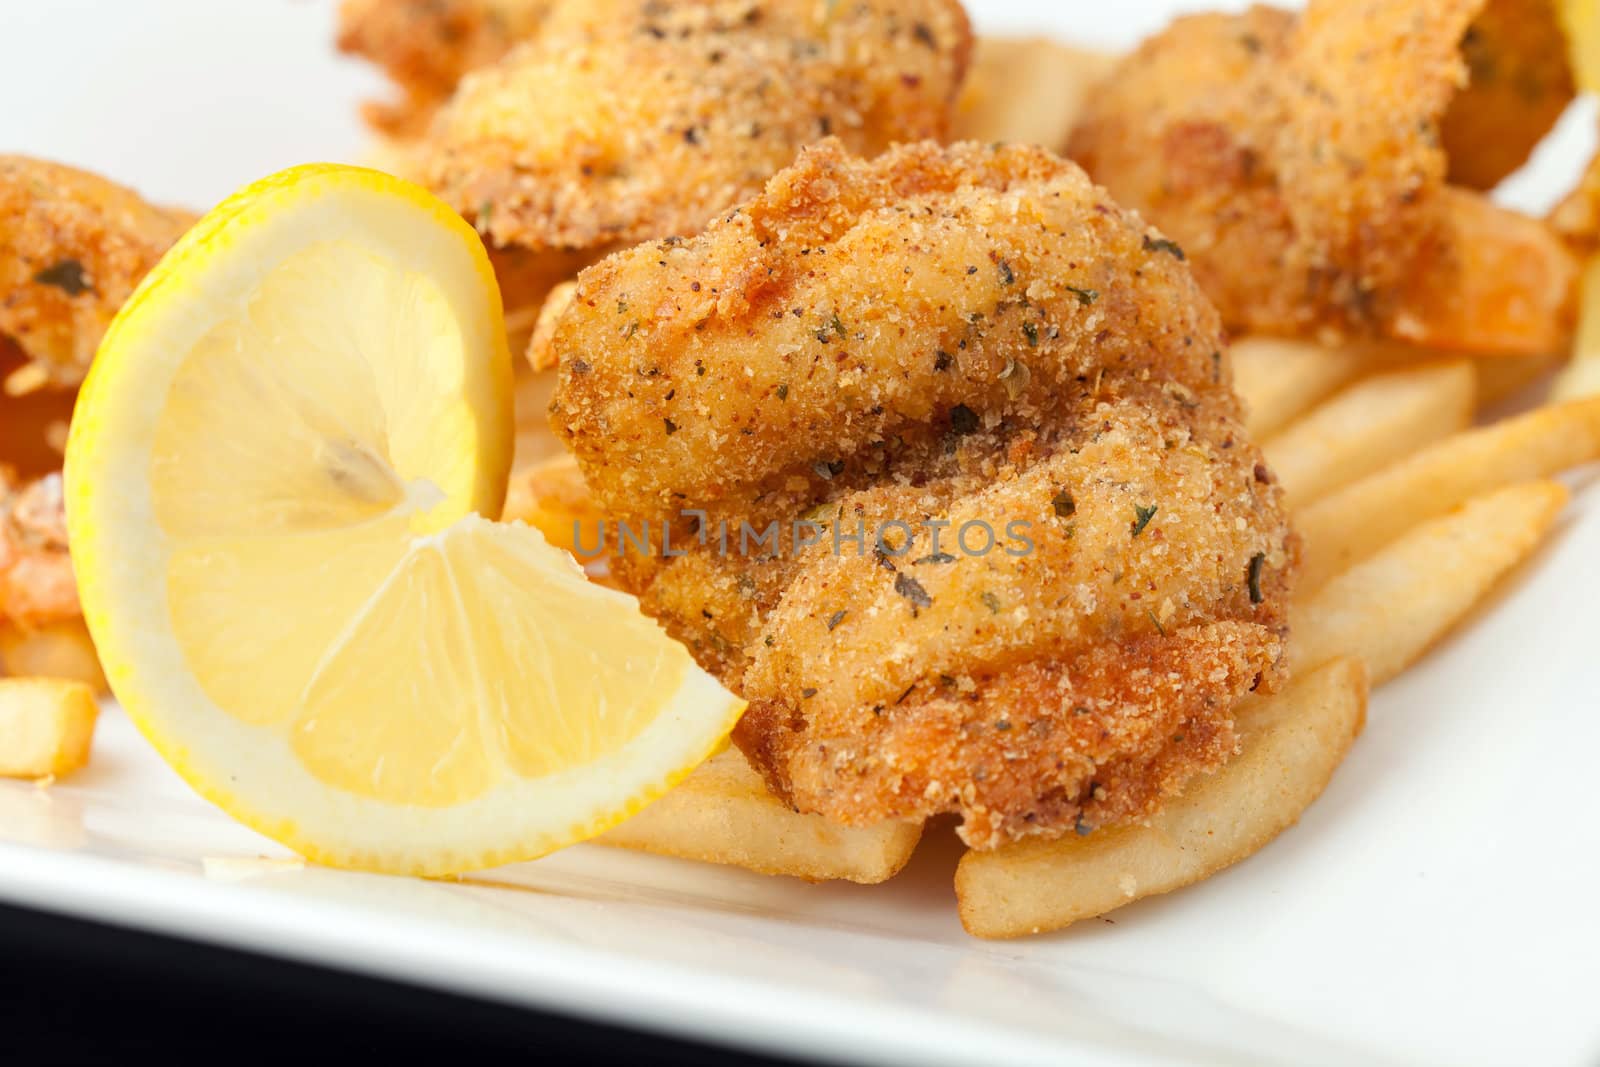 Fried shrimp and french fries plate garnished with lemon.